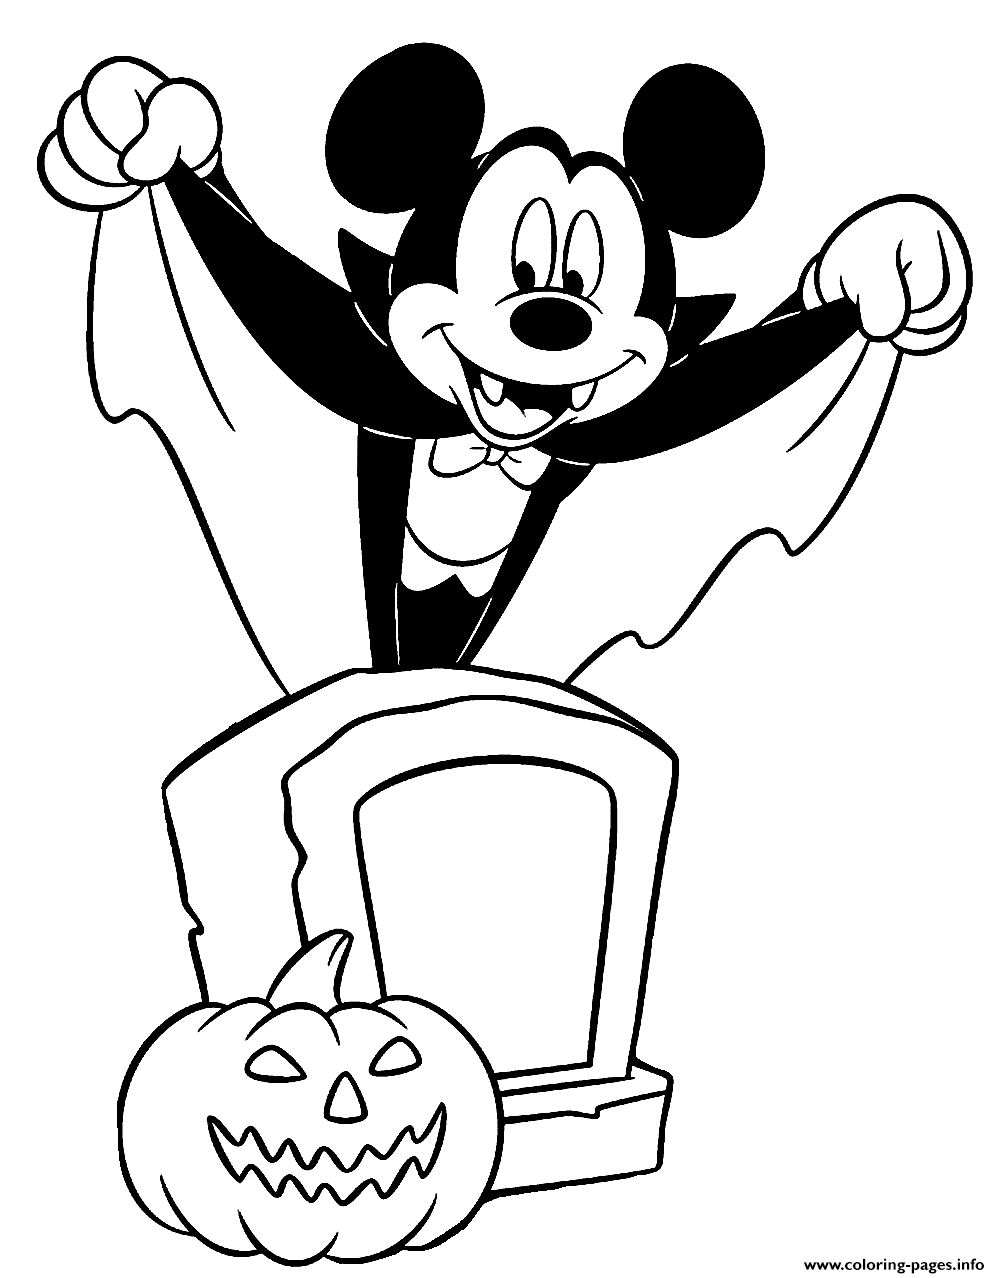 Mickey The Dracula Coloring Page